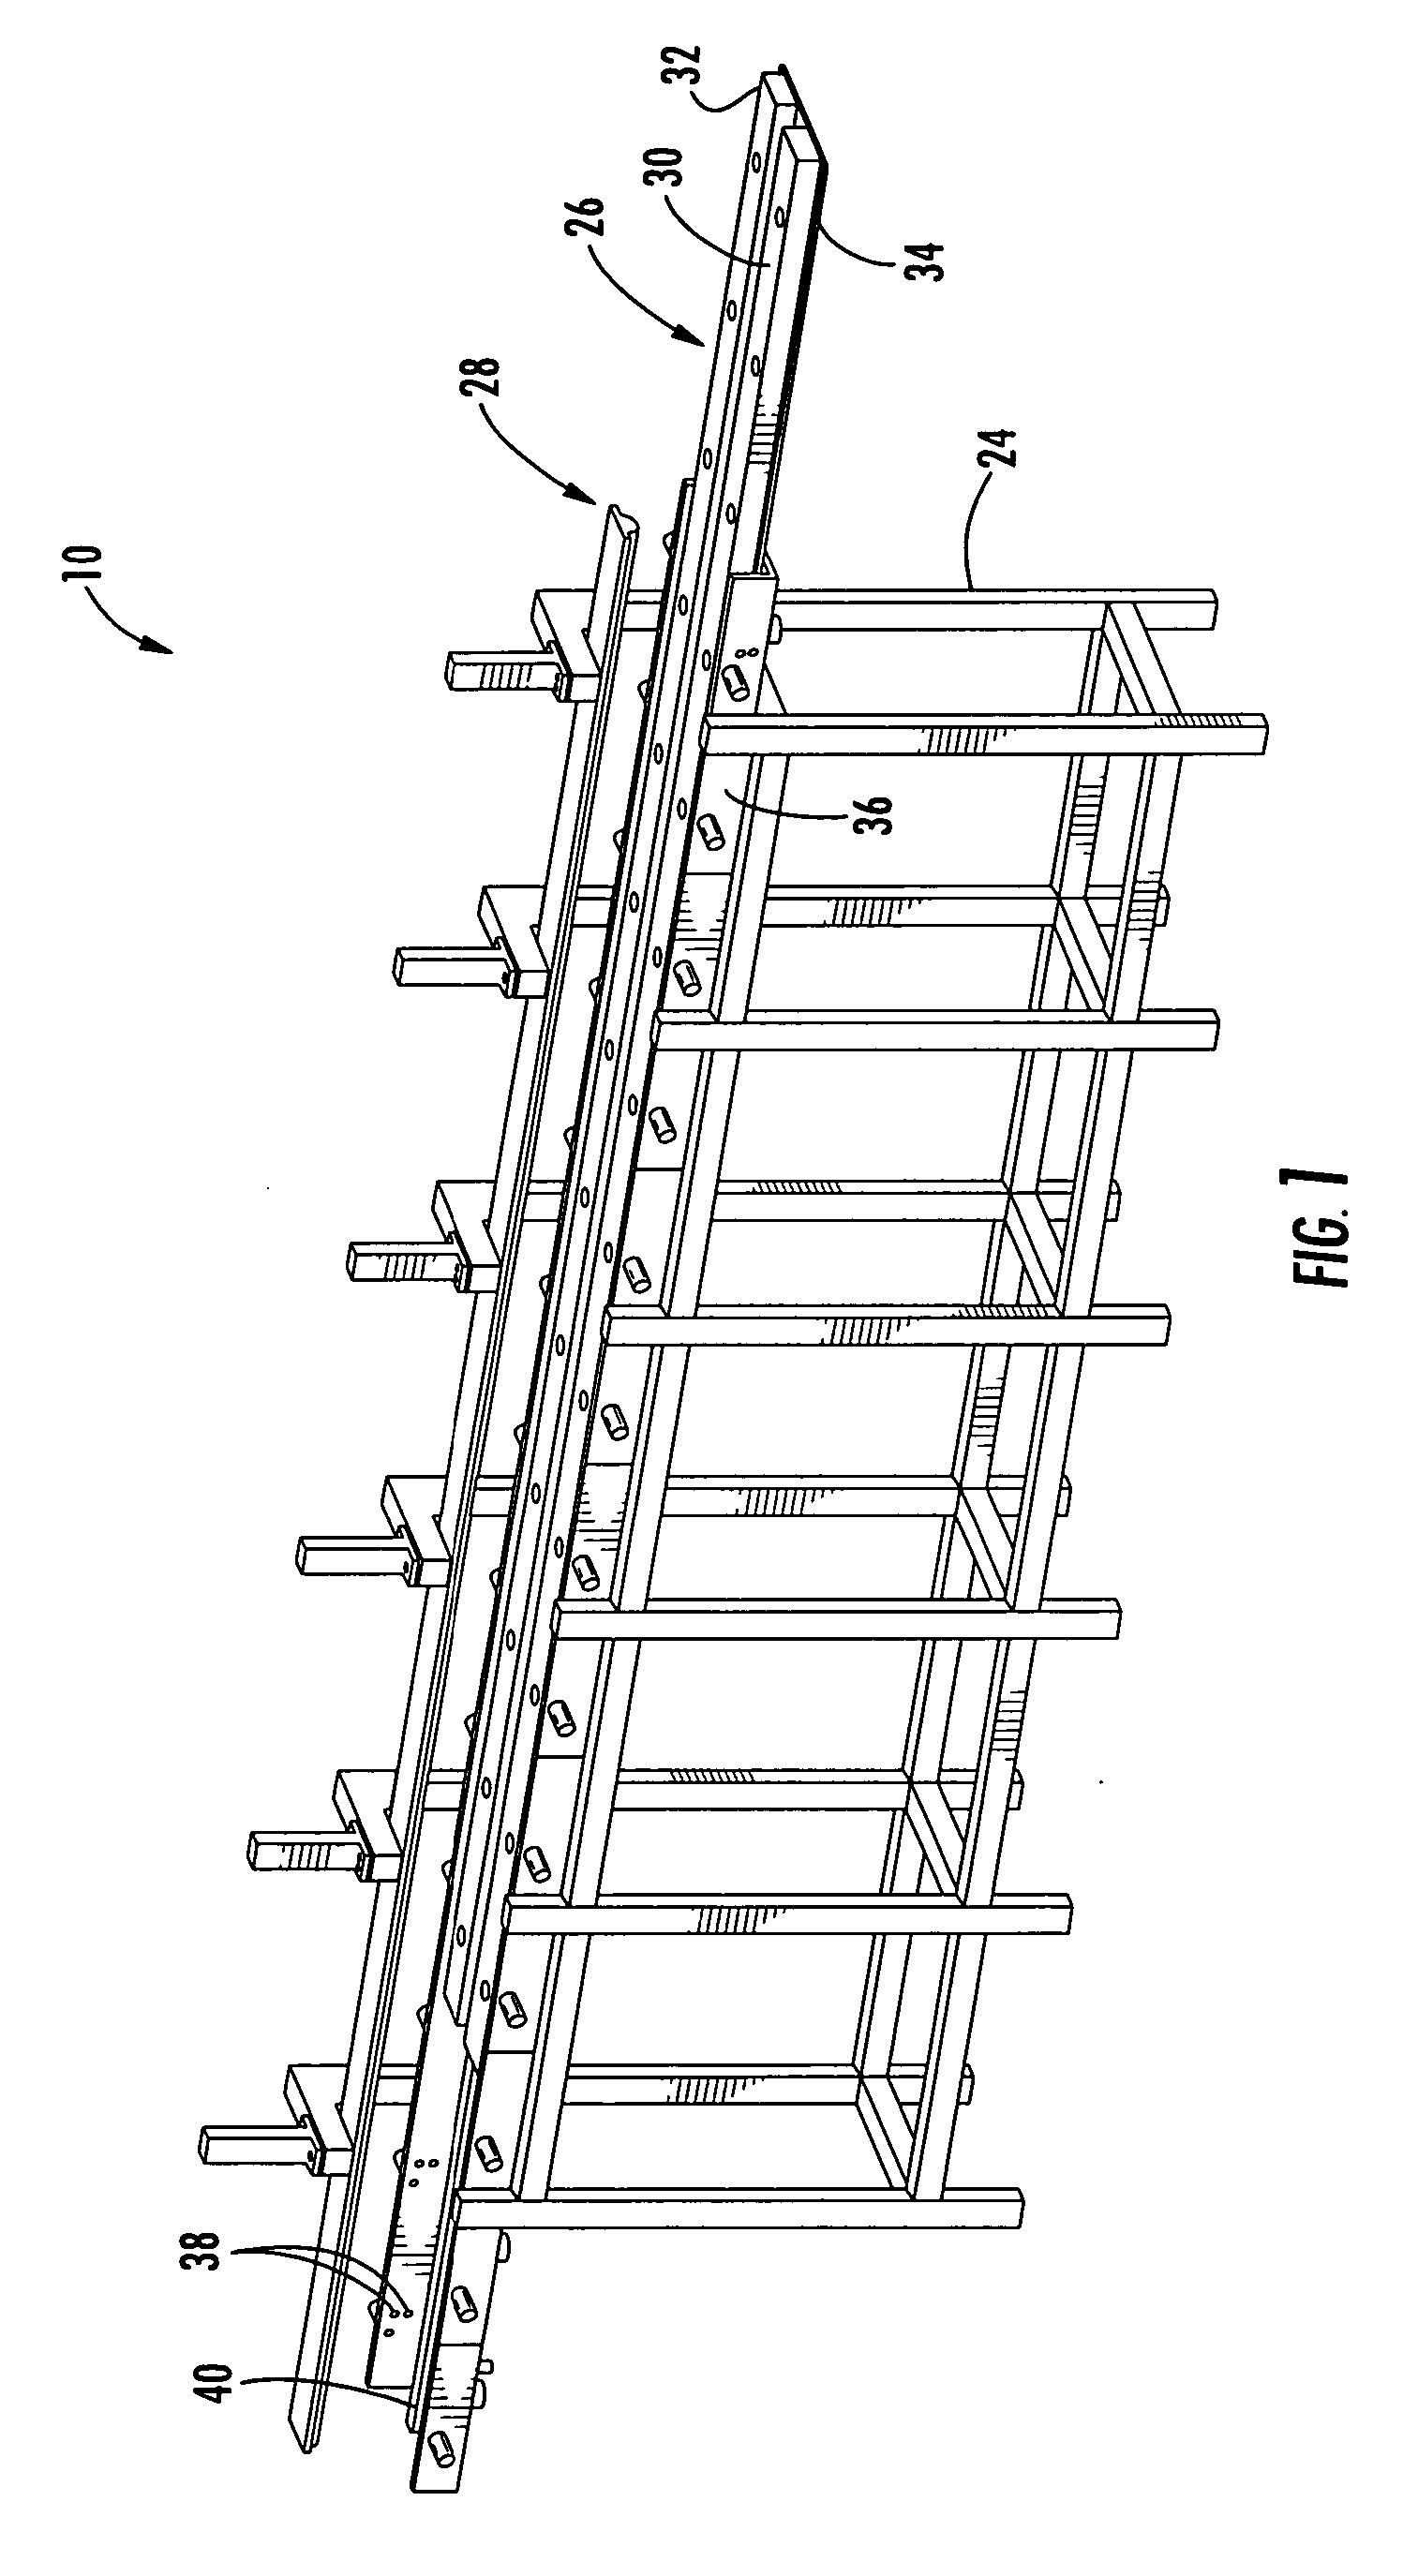 Method and apparatus for forming structural members